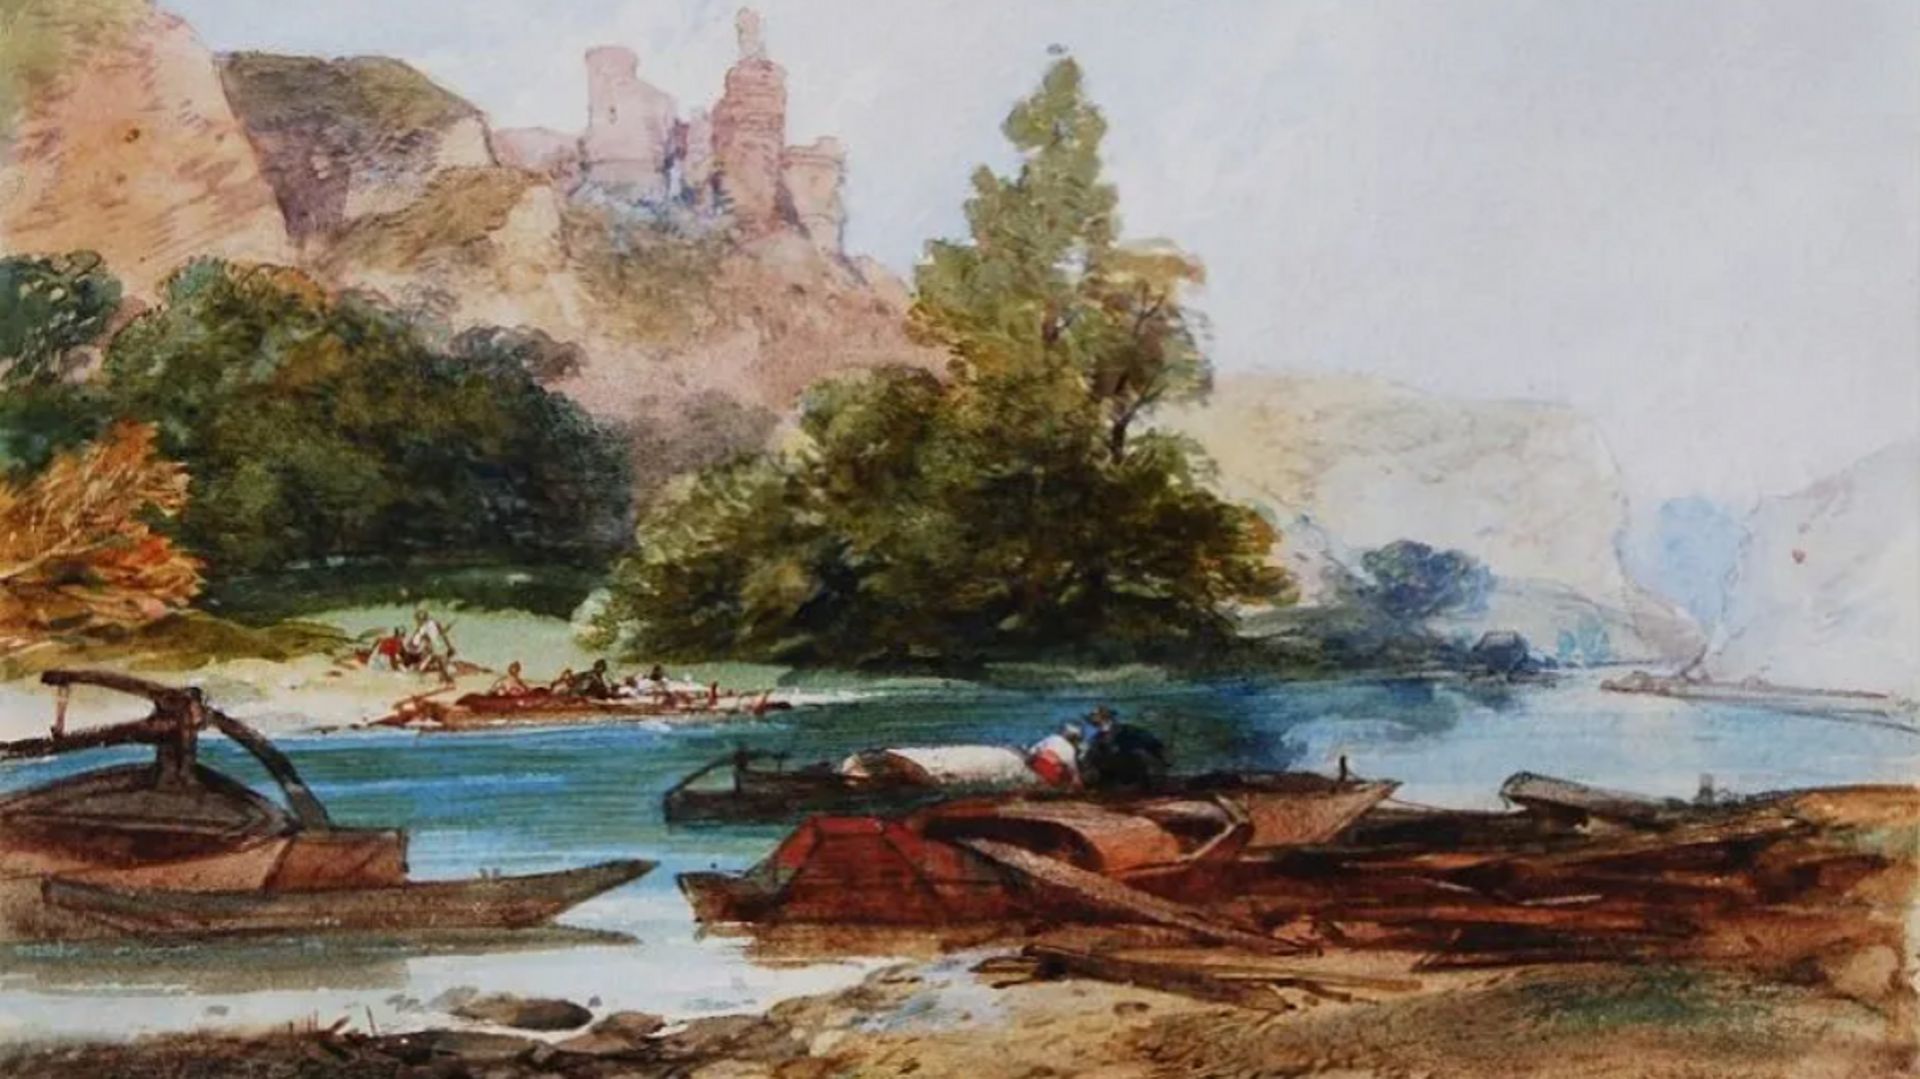 Dinan [sic] on the Meuse, 19th Century, William James Müller